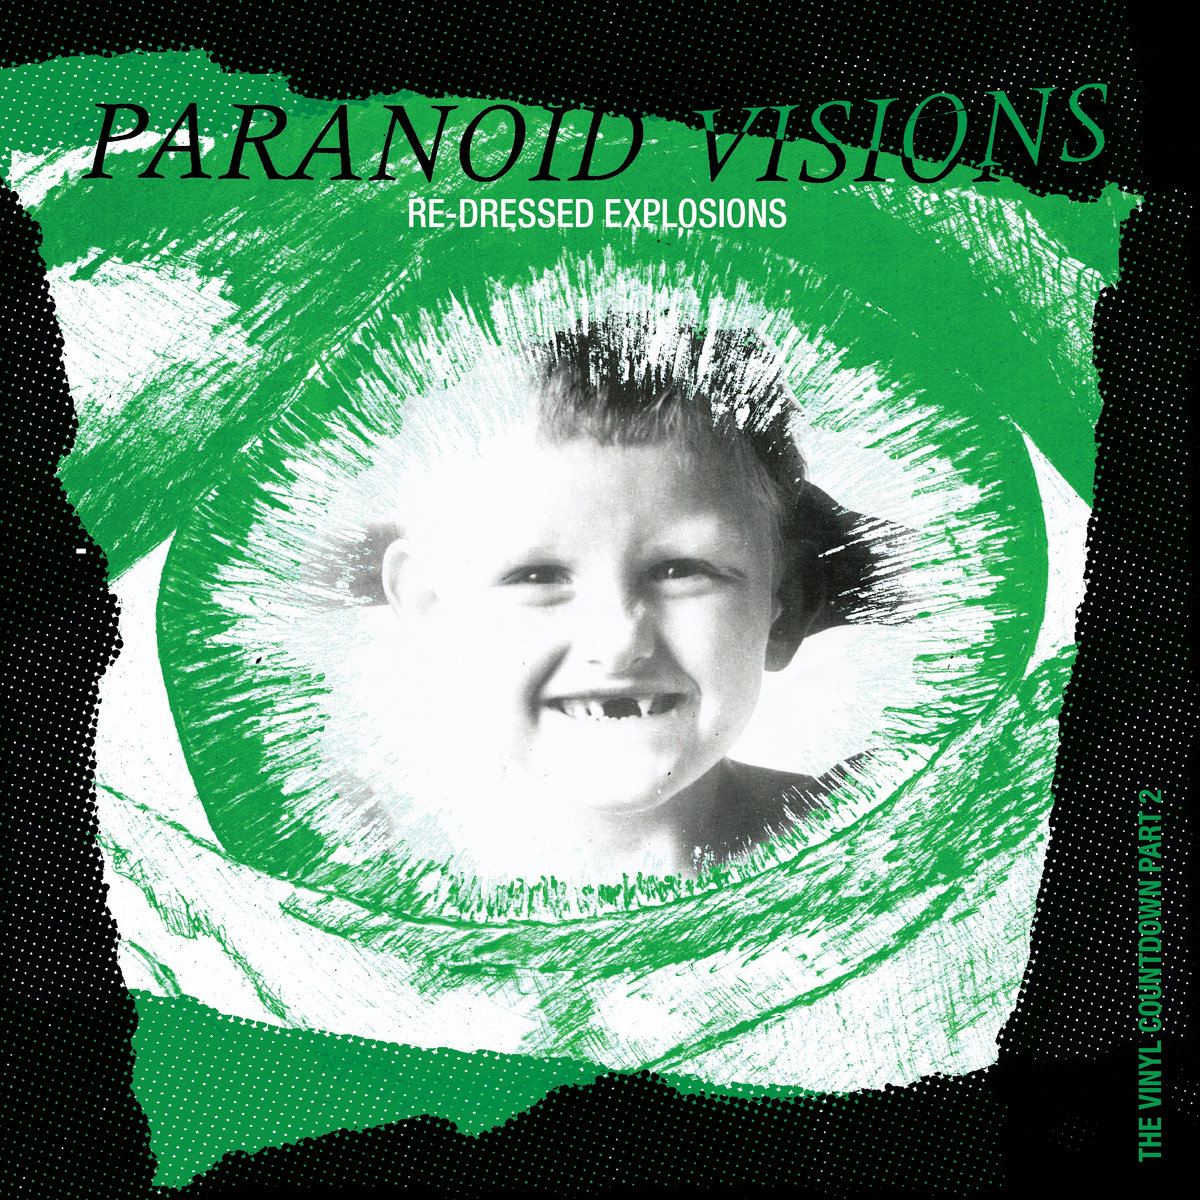 PARANOID VISIONS "Re-dressed explosions" - Double LP